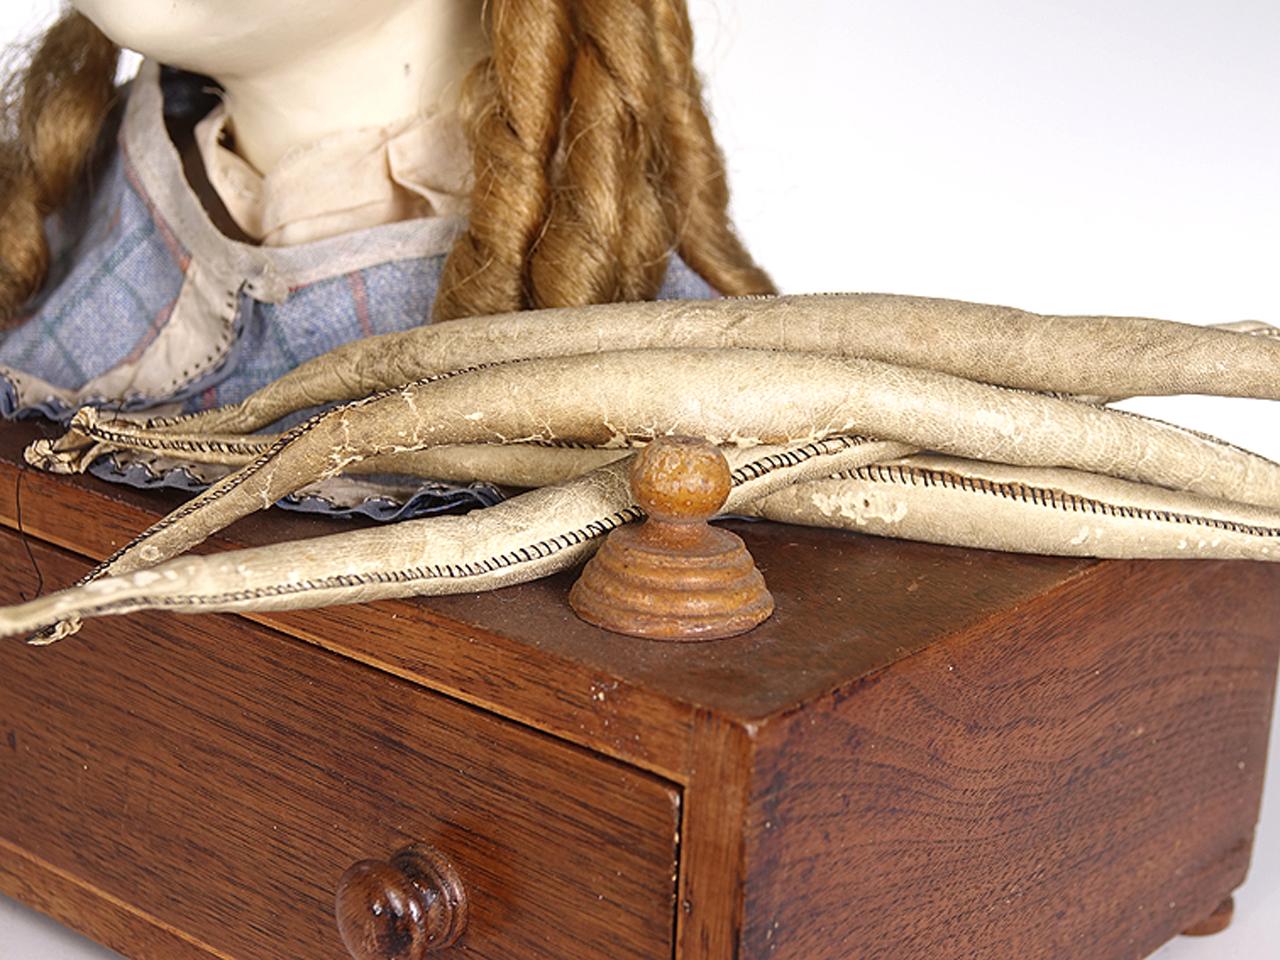 This is an early styling doll. When have you seen another dating to the 1800s. Its mounted to a cabinet with one draw. In the draw are a handful of worn original leather and horse hair rollers. Importantly the condition of the dolls hair is clean,